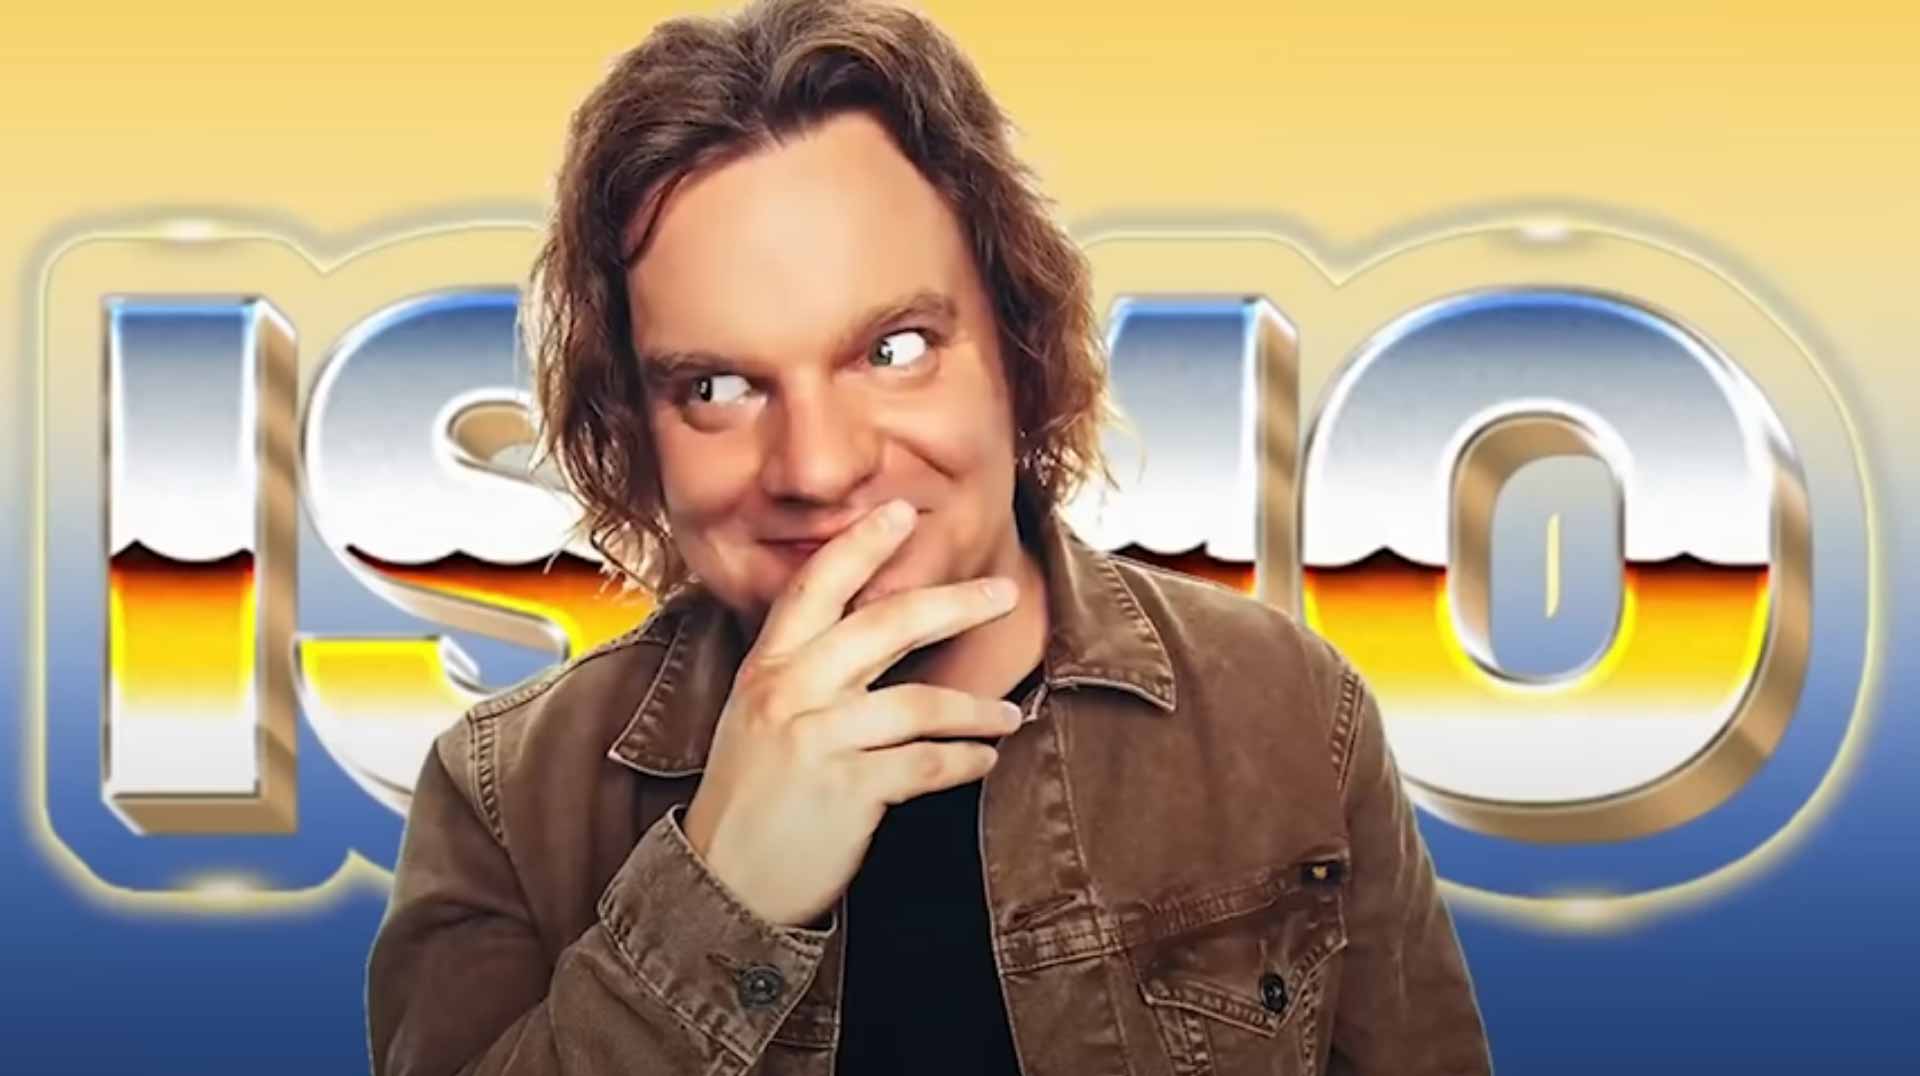 Comedian Ismo Man On The Moon